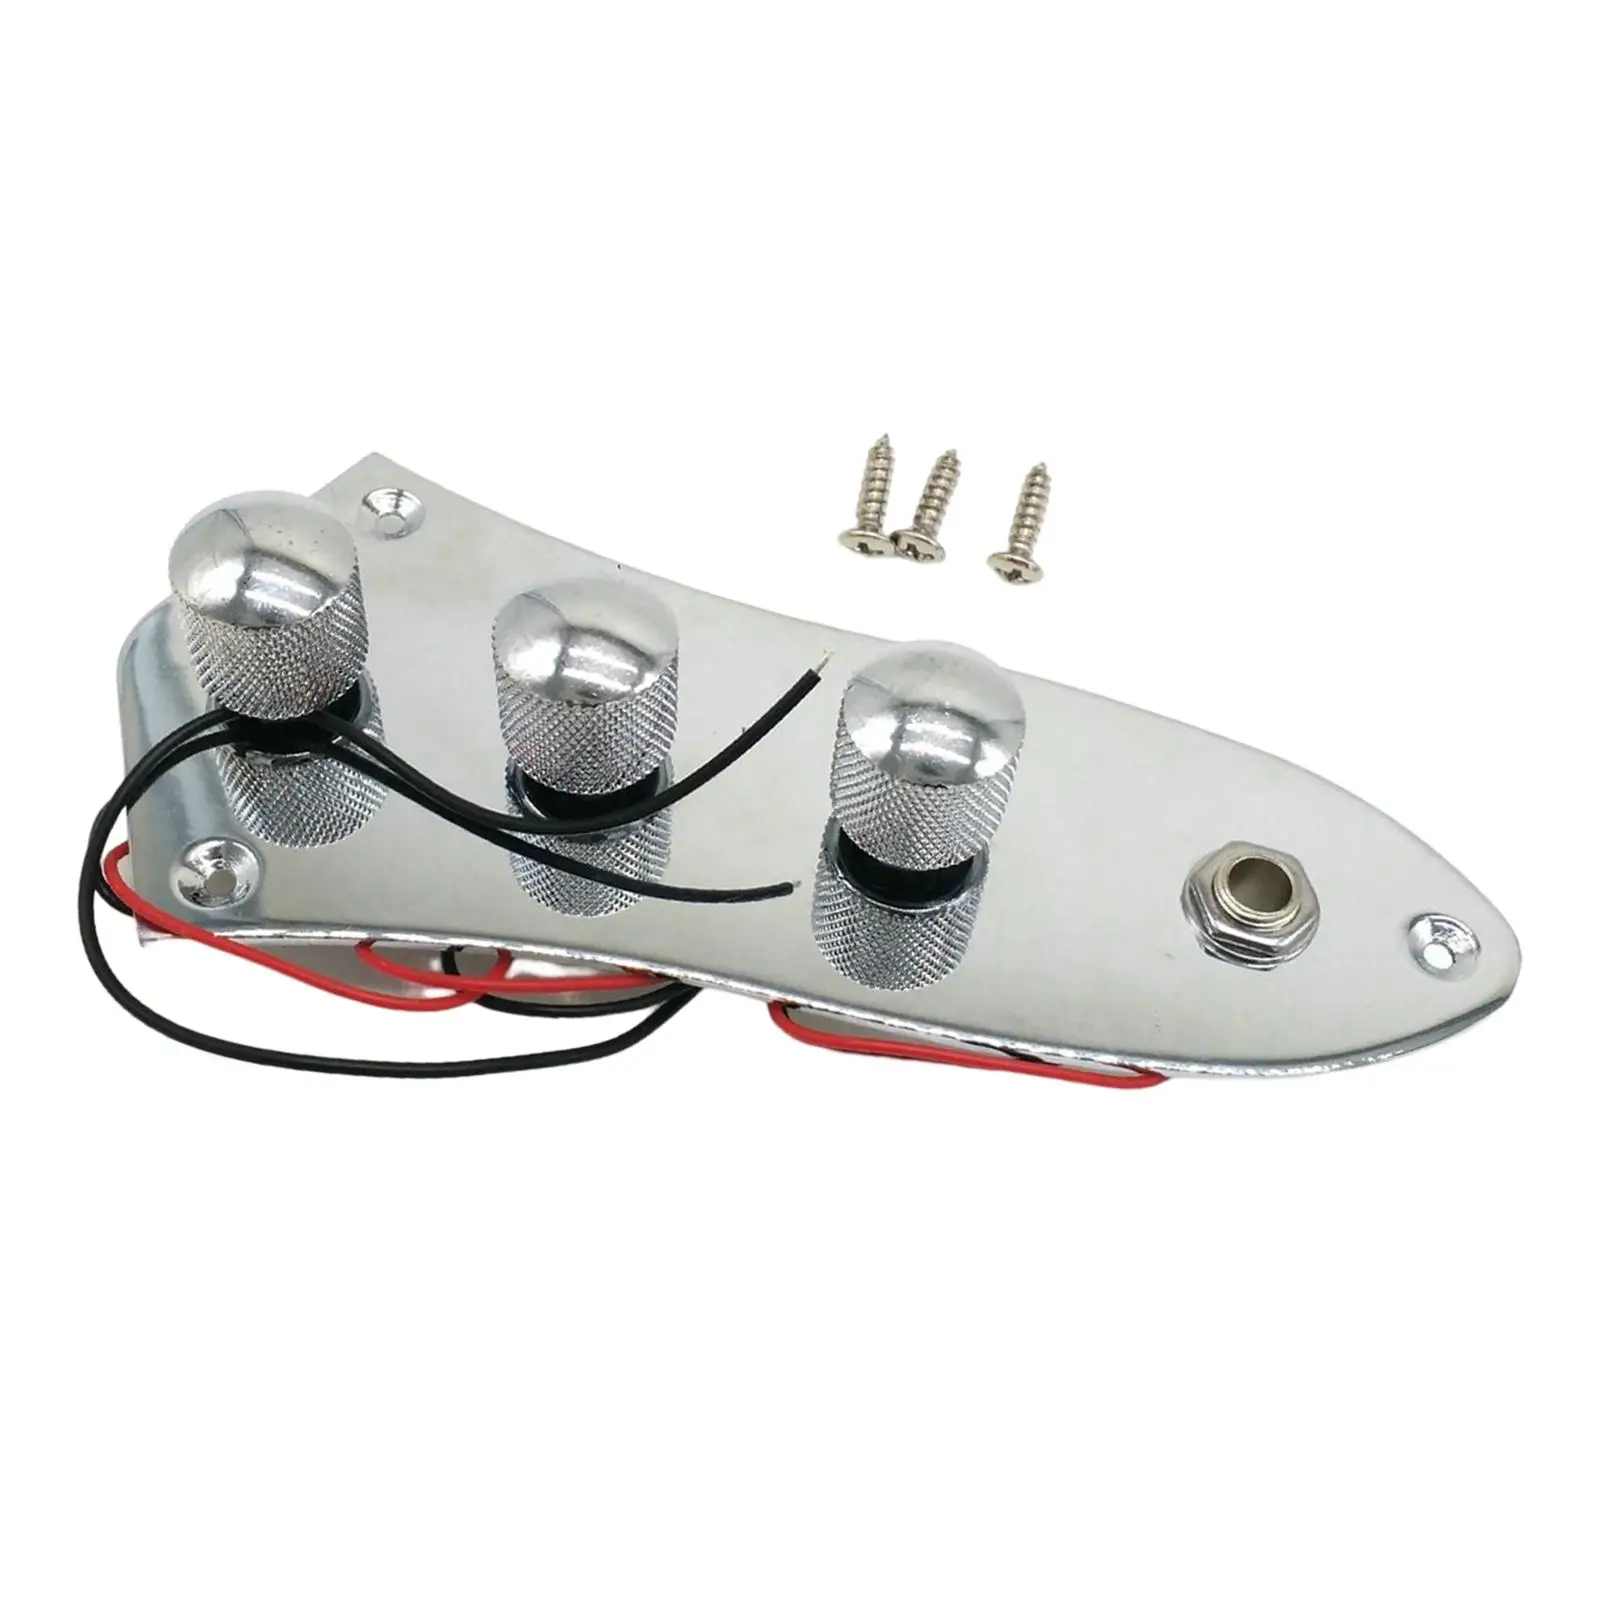 Bass Control Plate Wired Switch Control Plate Assembly Guitar Control Plate for Electric Bass Instrument Accessories Parts